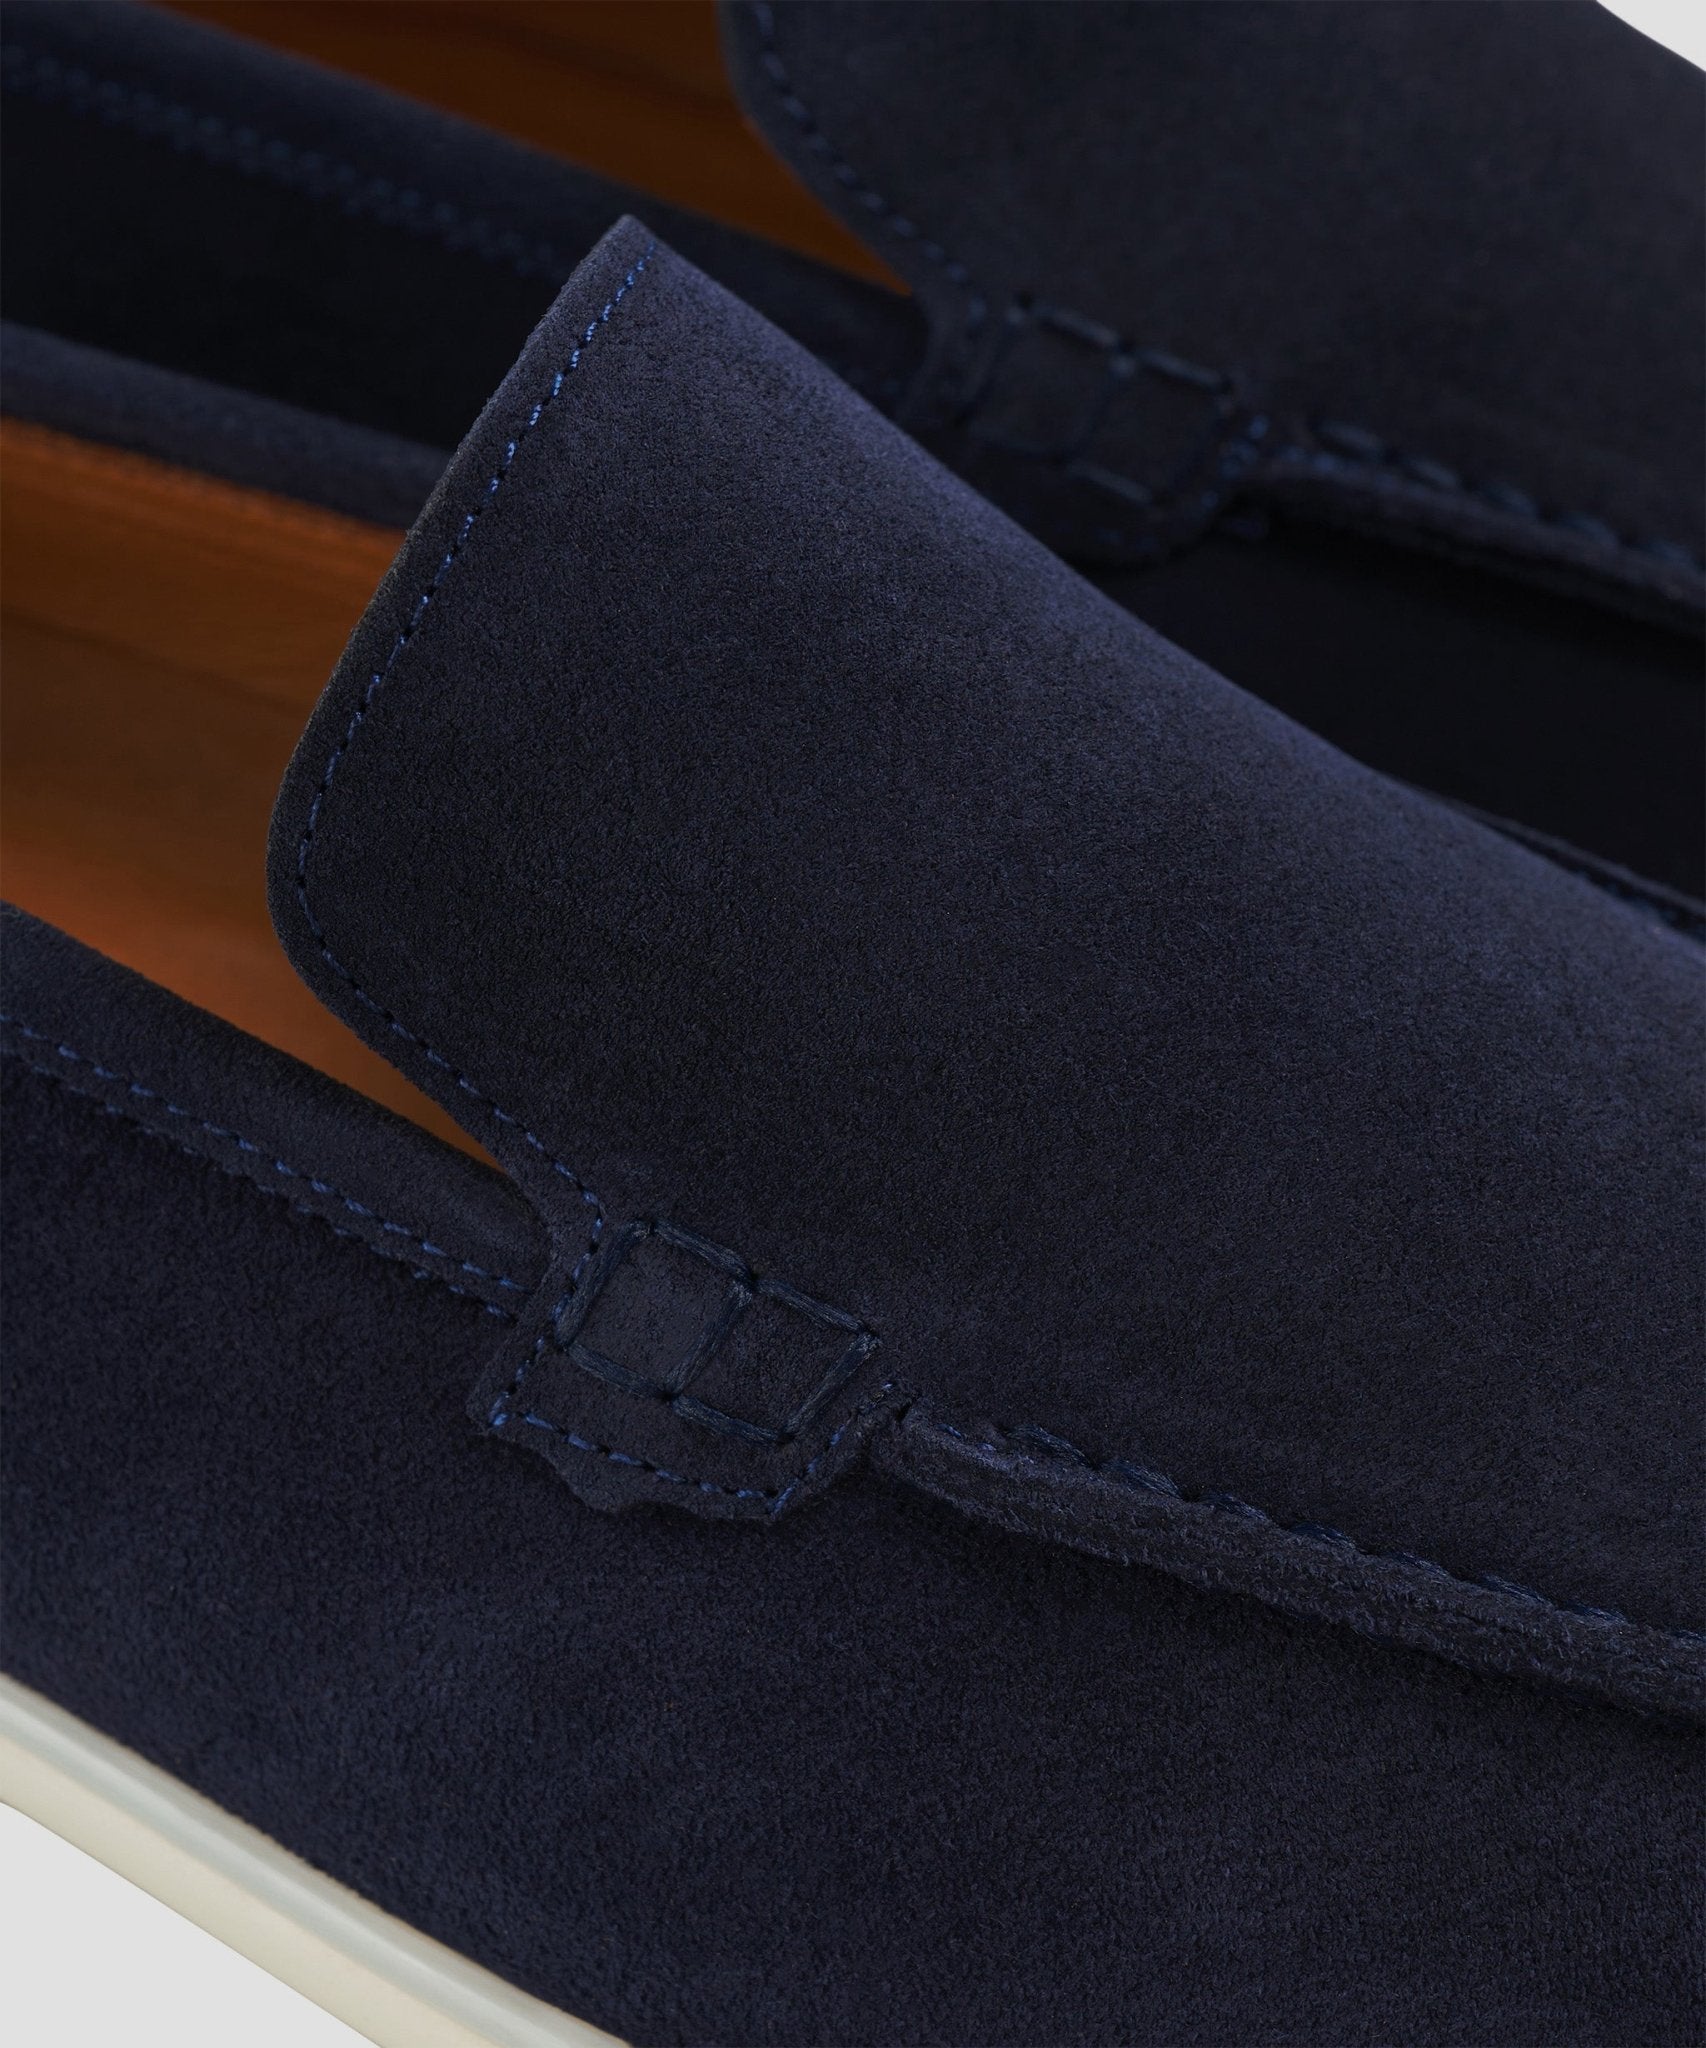 SOCI3TY Summer loafer suède donkerblauw - The Society Shop